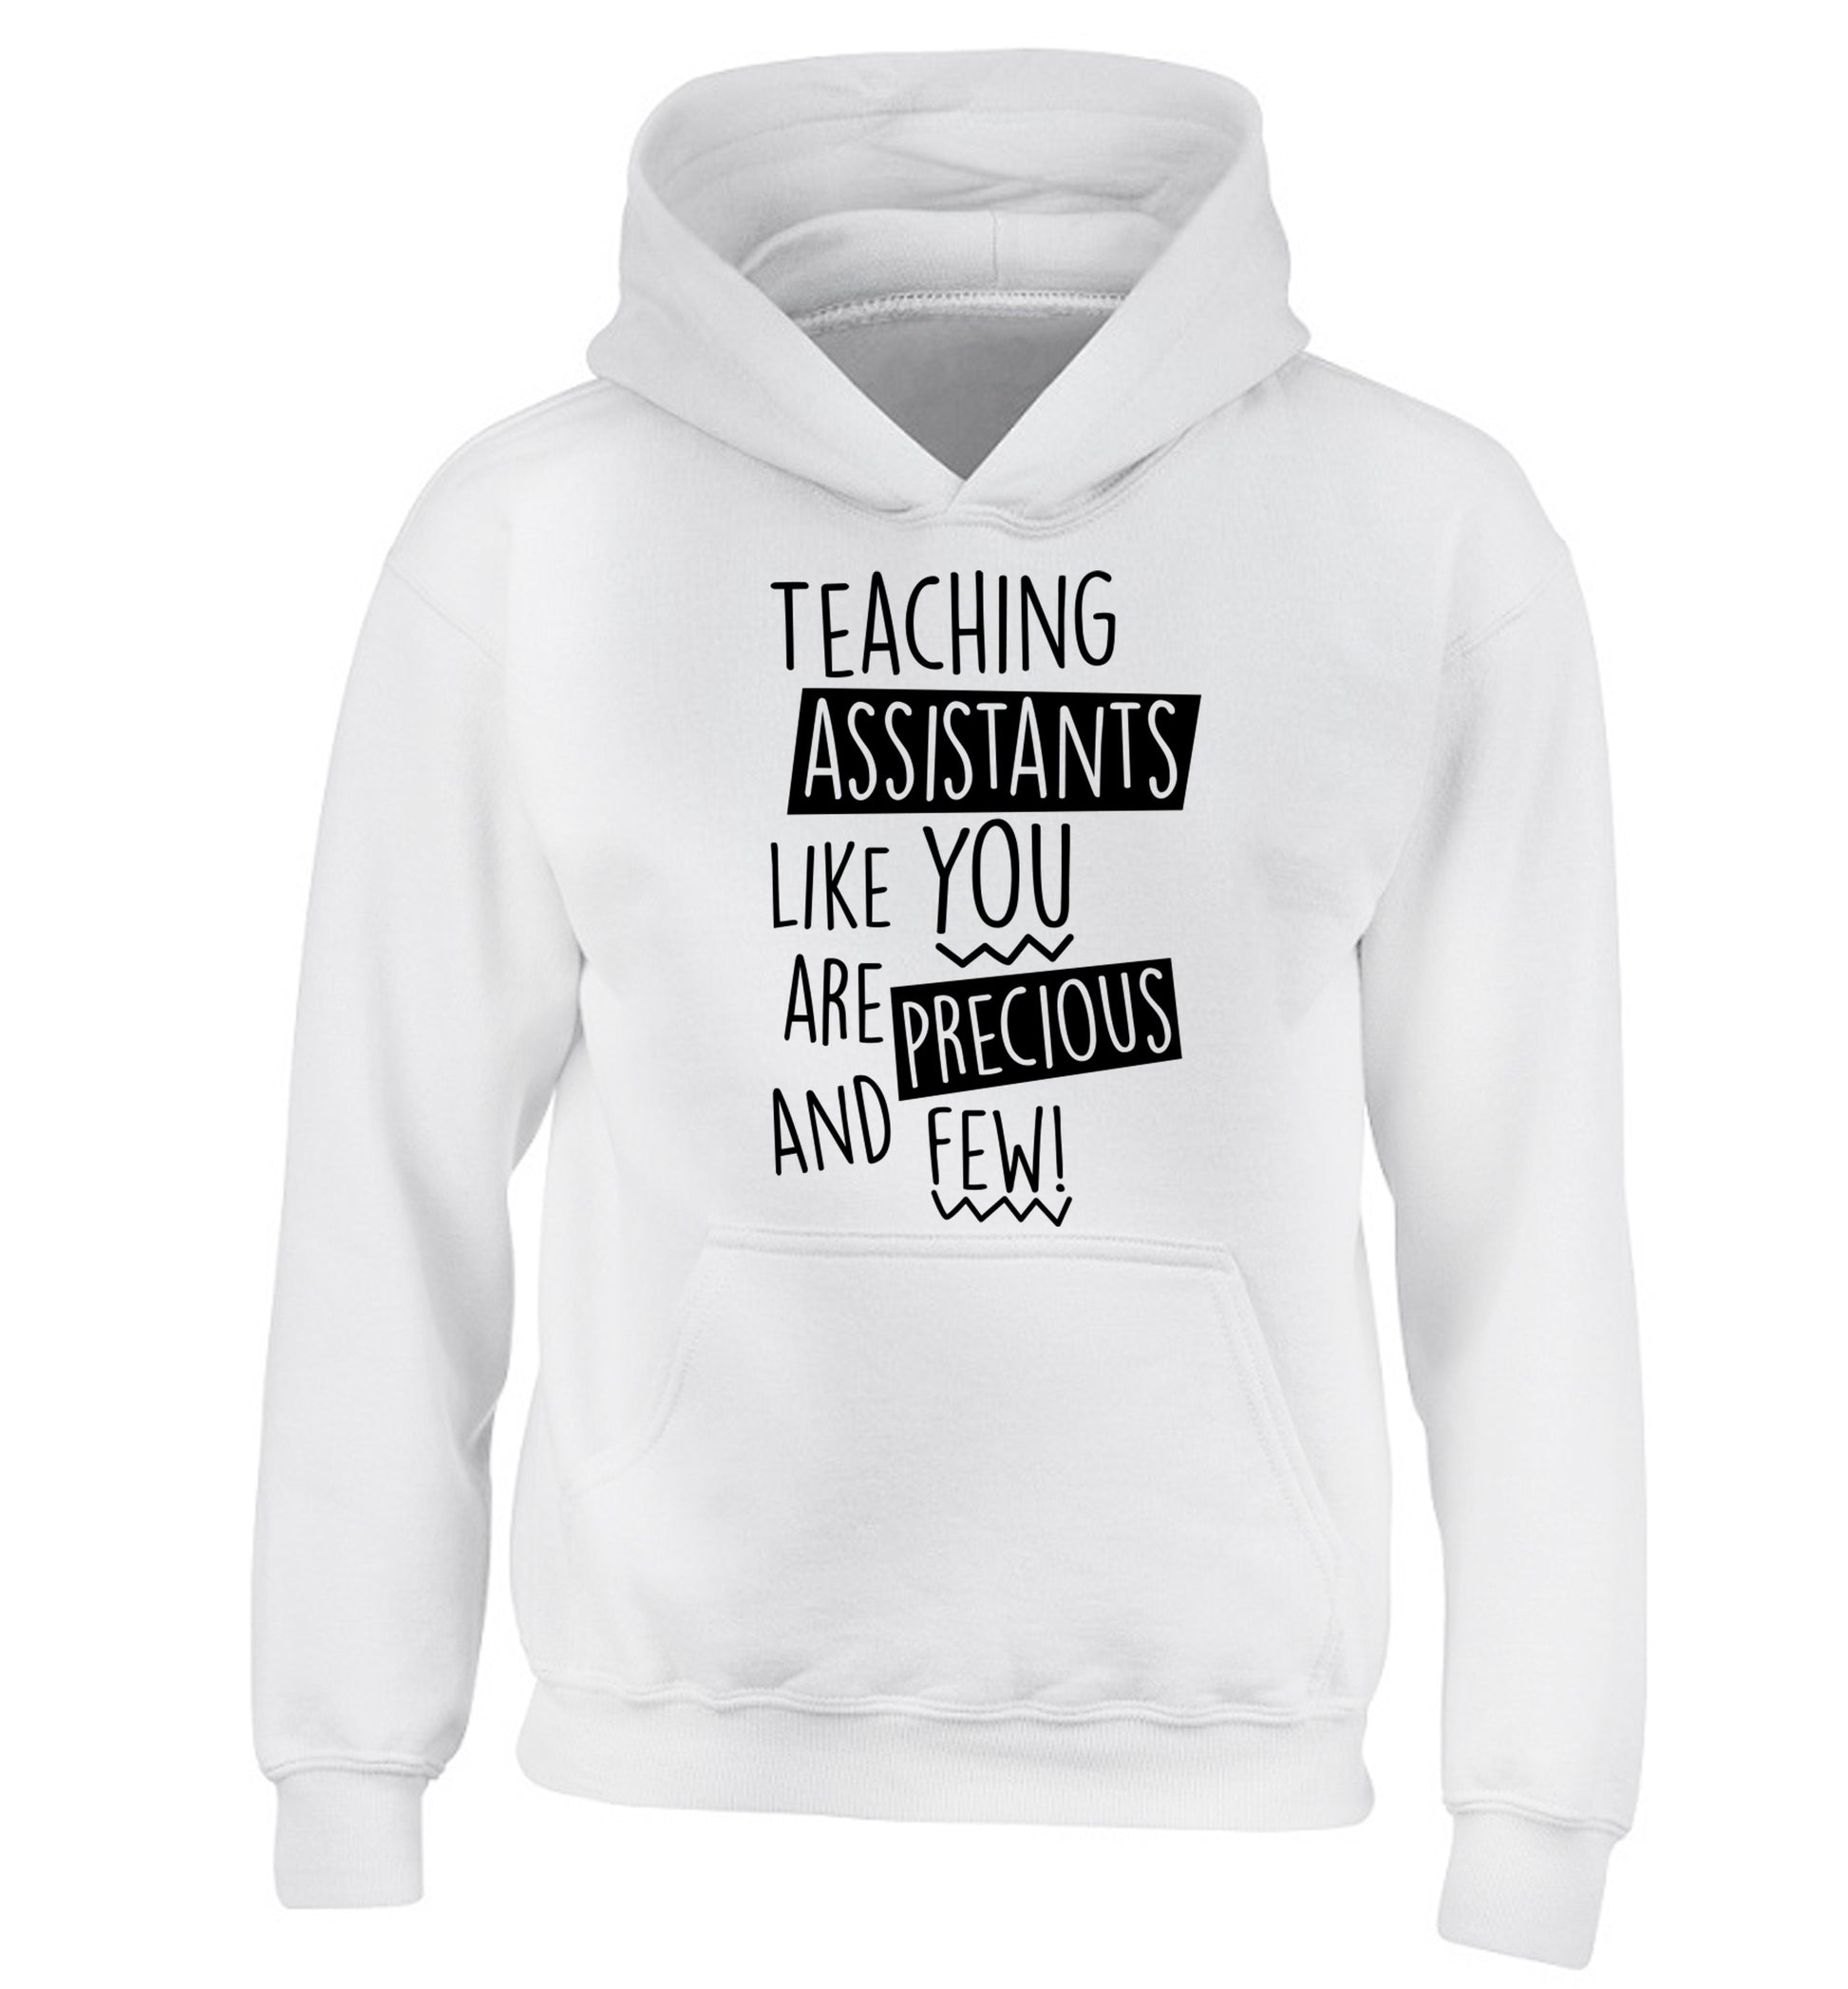 Teaching assistants like you are previous and few! children's white hoodie 12-14 Years